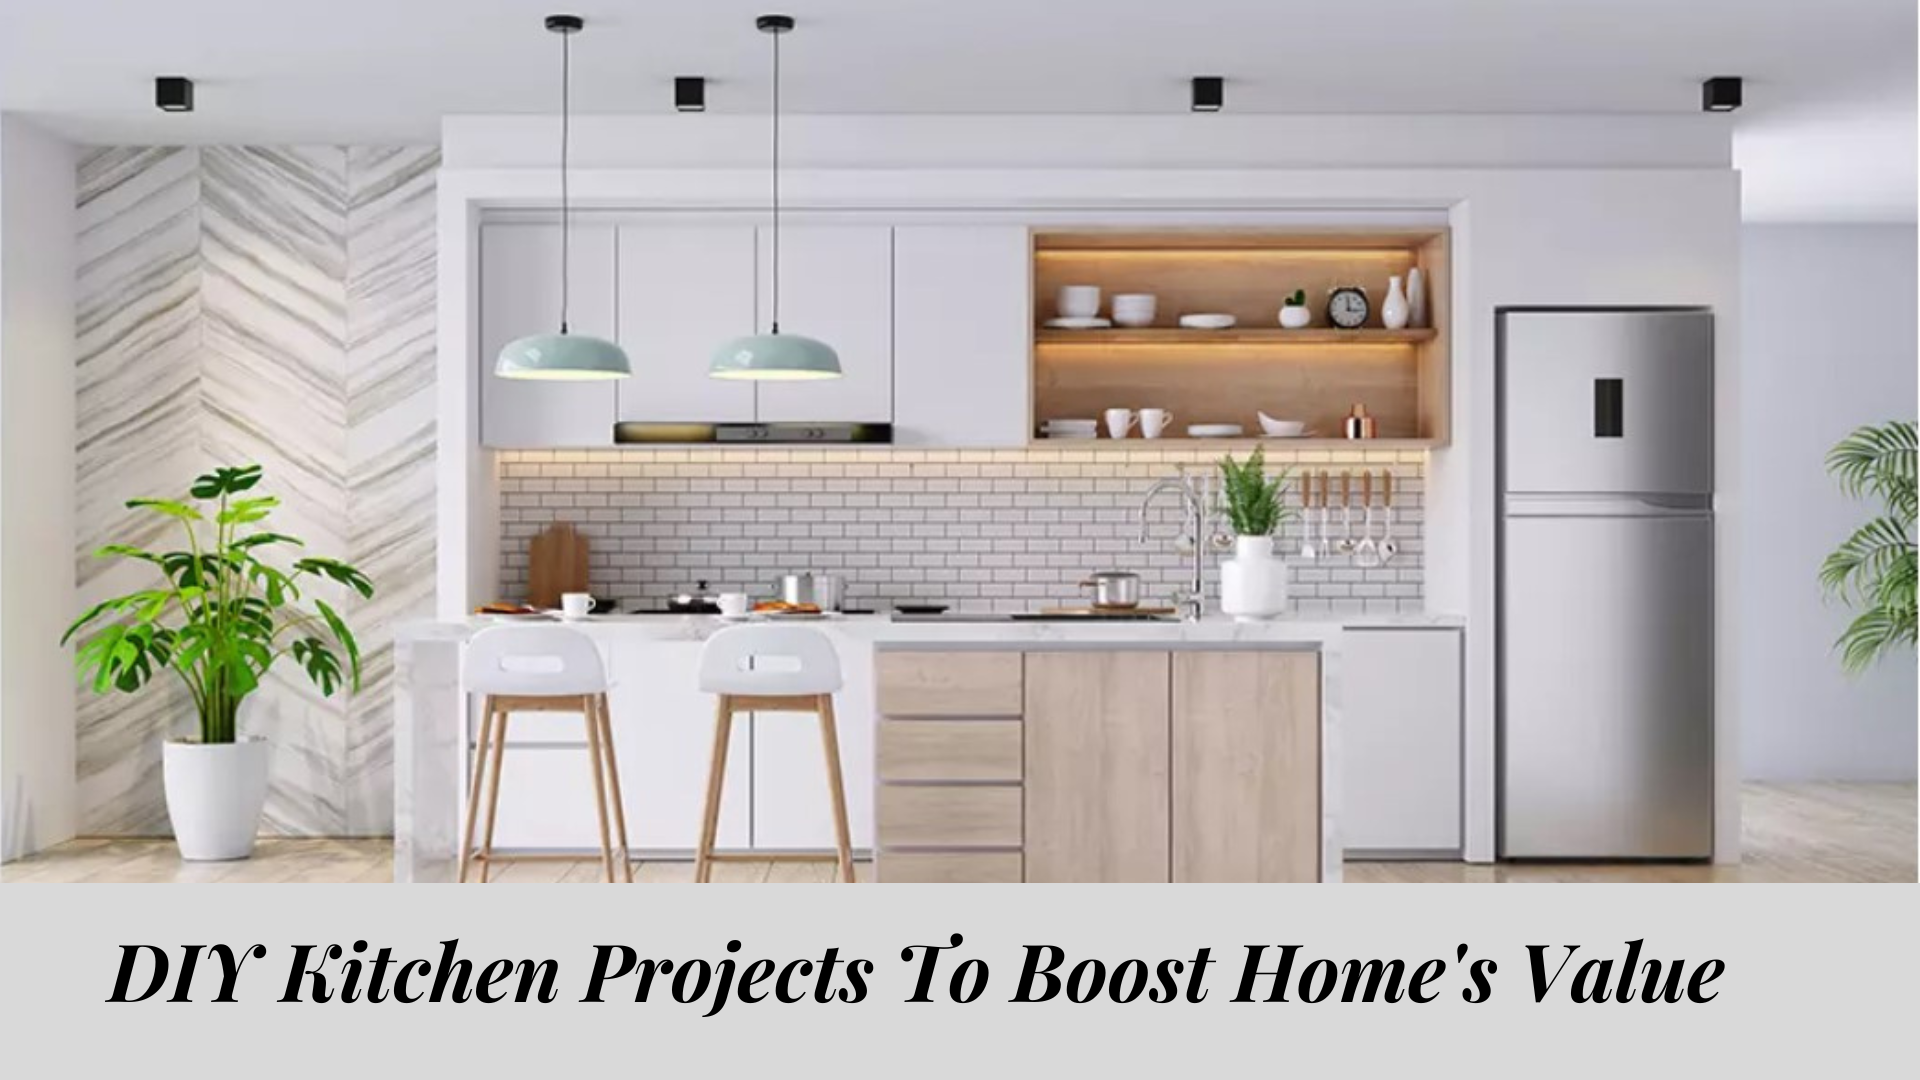 DIY-Kitchen-Projcts-Boost-Home's-Value